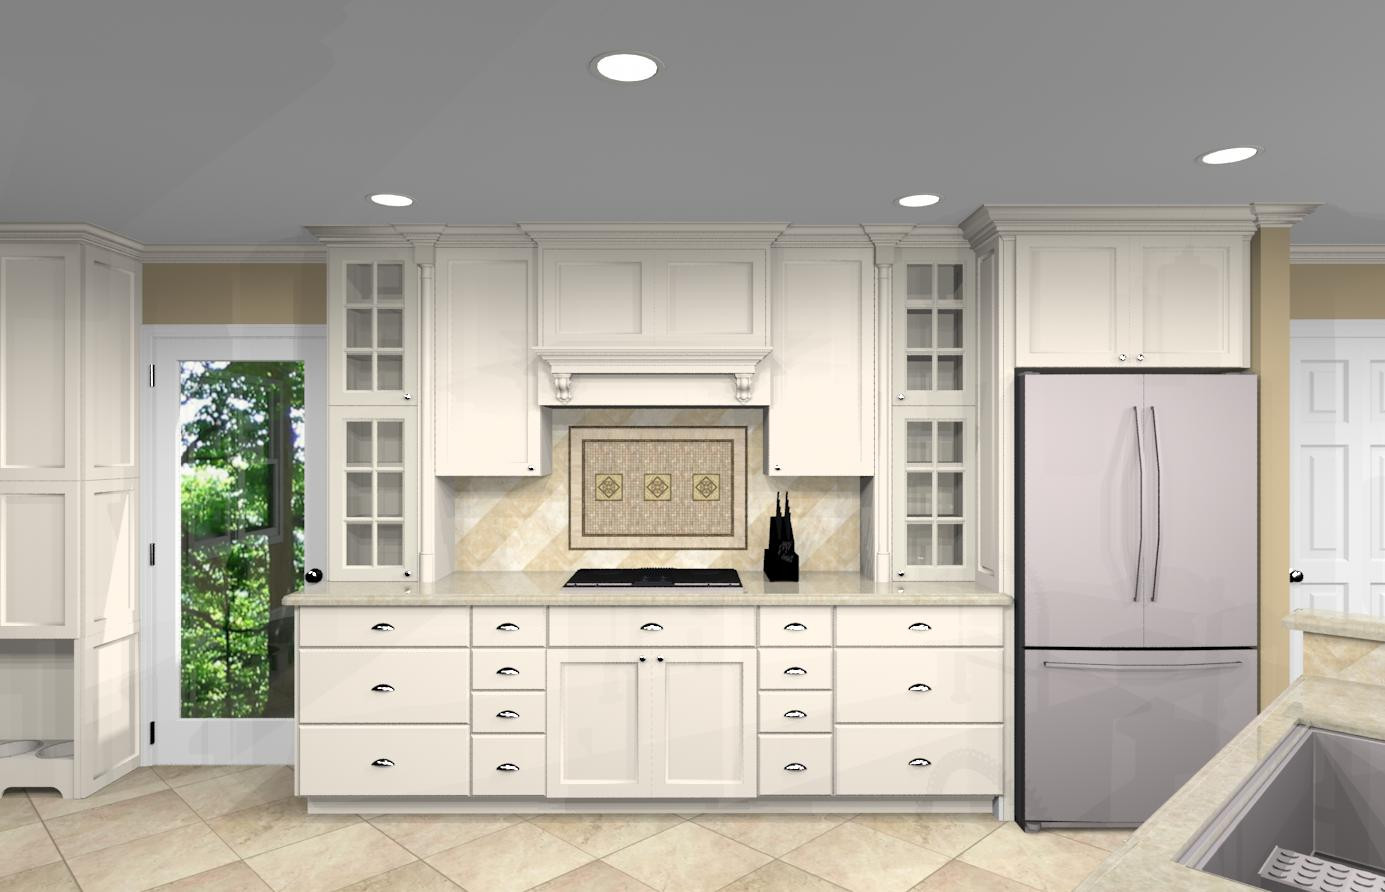 Kitchen Remodeling Plan
 Kitchen Remodeling Design with Open Floor Plan in Watchung